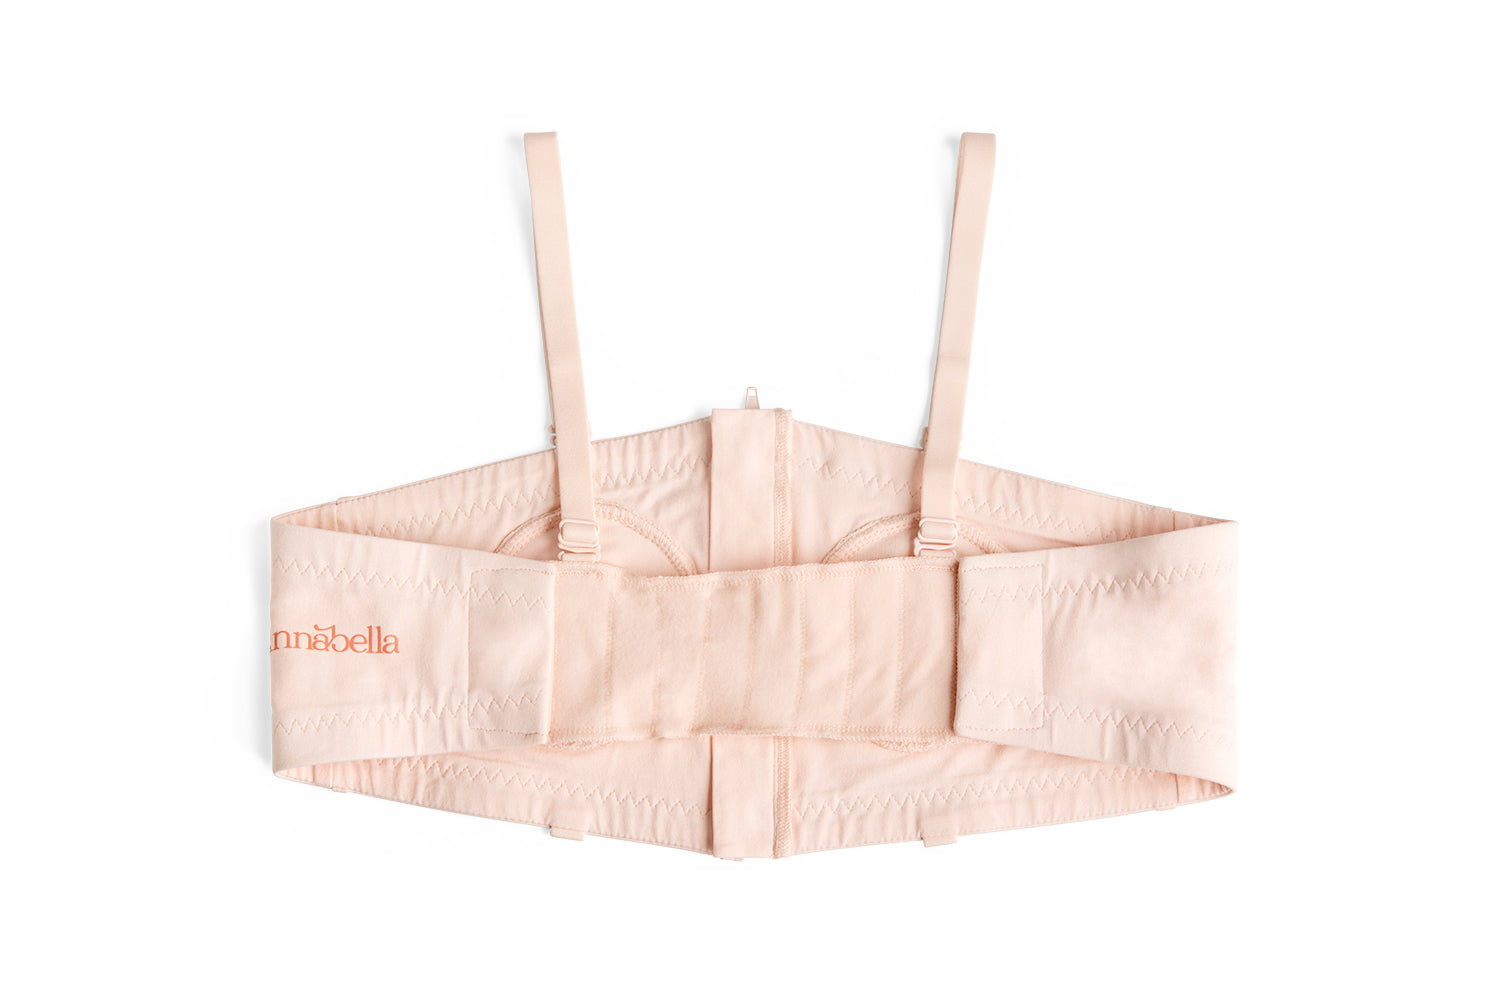 auden pumping bras - Buy auden pumping bras with free shipping on AliExpress